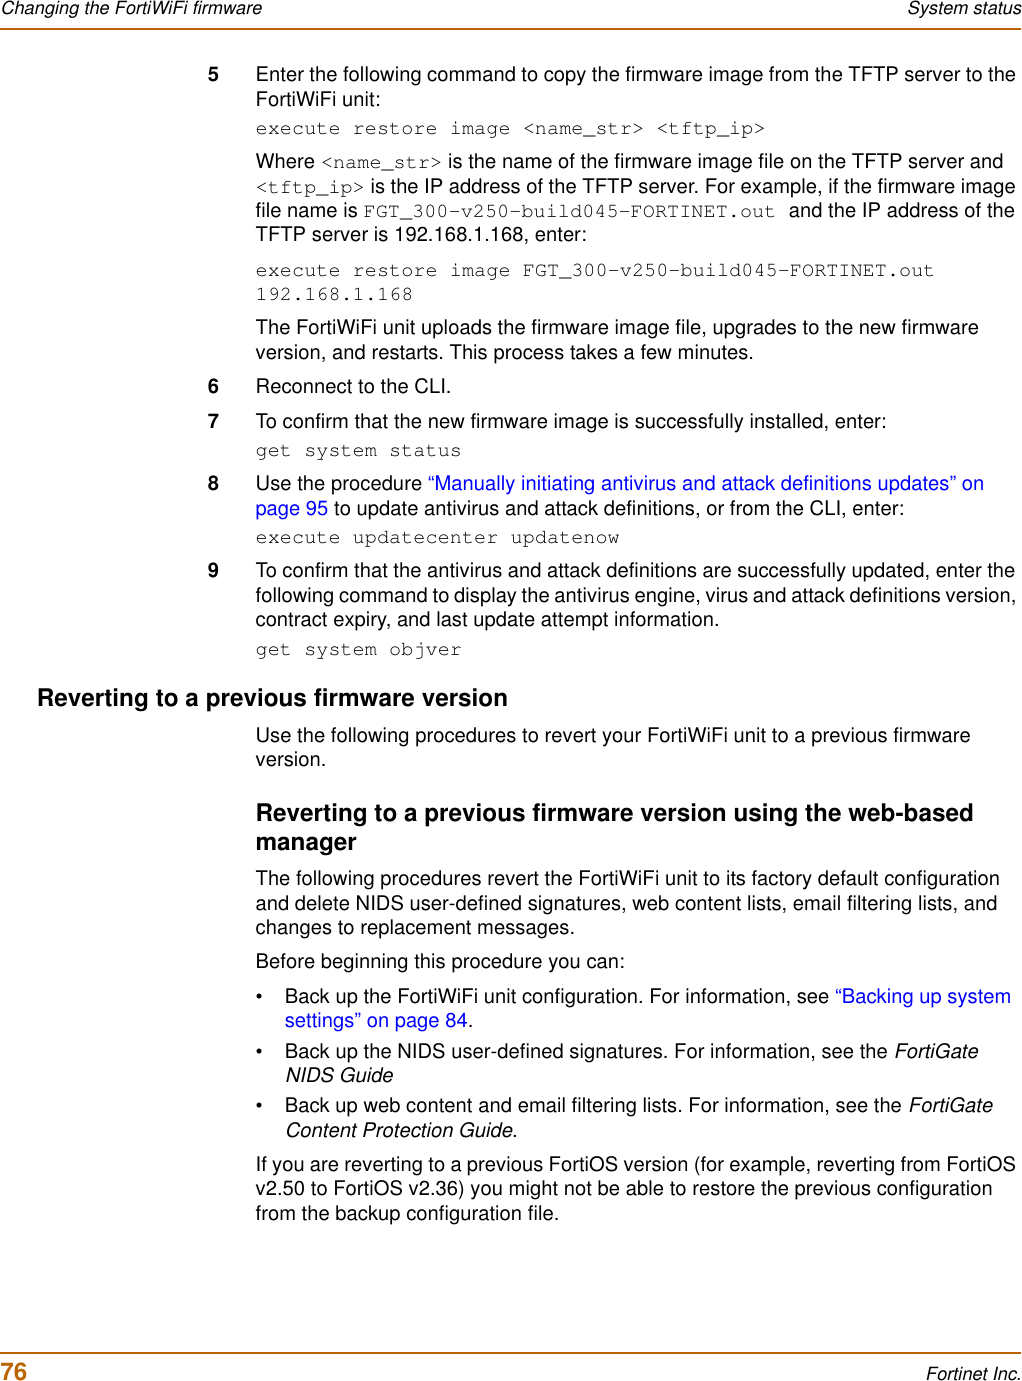 76 Fortinet Inc.Changing the FortiWiFi firmware System status5Enter the following command to copy the firmware image from the TFTP server to the FortiWiFi unit:execute restore image &lt;name_str&gt; &lt;tftp_ip&gt;Where &lt;name_str&gt; is the name of the firmware image file on the TFTP server and &lt;tftp_ip&gt; is the IP address of the TFTP server. For example, if the firmware image file name is FGT_300-v250-build045-FORTINET.out and the IP address of the TFTP server is 192.168.1.168, enter:execute restore image FGT_300-v250-build045-FORTINET.out 192.168.1.168The FortiWiFi unit uploads the firmware image file, upgrades to the new firmware version, and restarts. This process takes a few minutes.6Reconnect to the CLI.7To confirm that the new firmware image is successfully installed, enter:get system status8Use the procedure “Manually initiating antivirus and attack definitions updates” on page 95 to update antivirus and attack definitions, or from the CLI, enter:execute updatecenter updatenow9To confirm that the antivirus and attack definitions are successfully updated, enter the following command to display the antivirus engine, virus and attack definitions version, contract expiry, and last update attempt information.get system objverReverting to a previous firmware versionUse the following procedures to revert your FortiWiFi unit to a previous firmware version.Reverting to a previous firmware version using the web-based managerThe following procedures revert the FortiWiFi unit to its factory default configuration and delete NIDS user-defined signatures, web content lists, email filtering lists, and changes to replacement messages.Before beginning this procedure you can:• Back up the FortiWiFi unit configuration. For information, see “Backing up system settings” on page 84.• Back up the NIDS user-defined signatures. For information, see the FortiGate NIDS Guide• Back up web content and email filtering lists. For information, see the FortiGate Content Protection Guide.If you are reverting to a previous FortiOS version (for example, reverting from FortiOS v2.50 to FortiOS v2.36) you might not be able to restore the previous configuration from the backup configuration file.